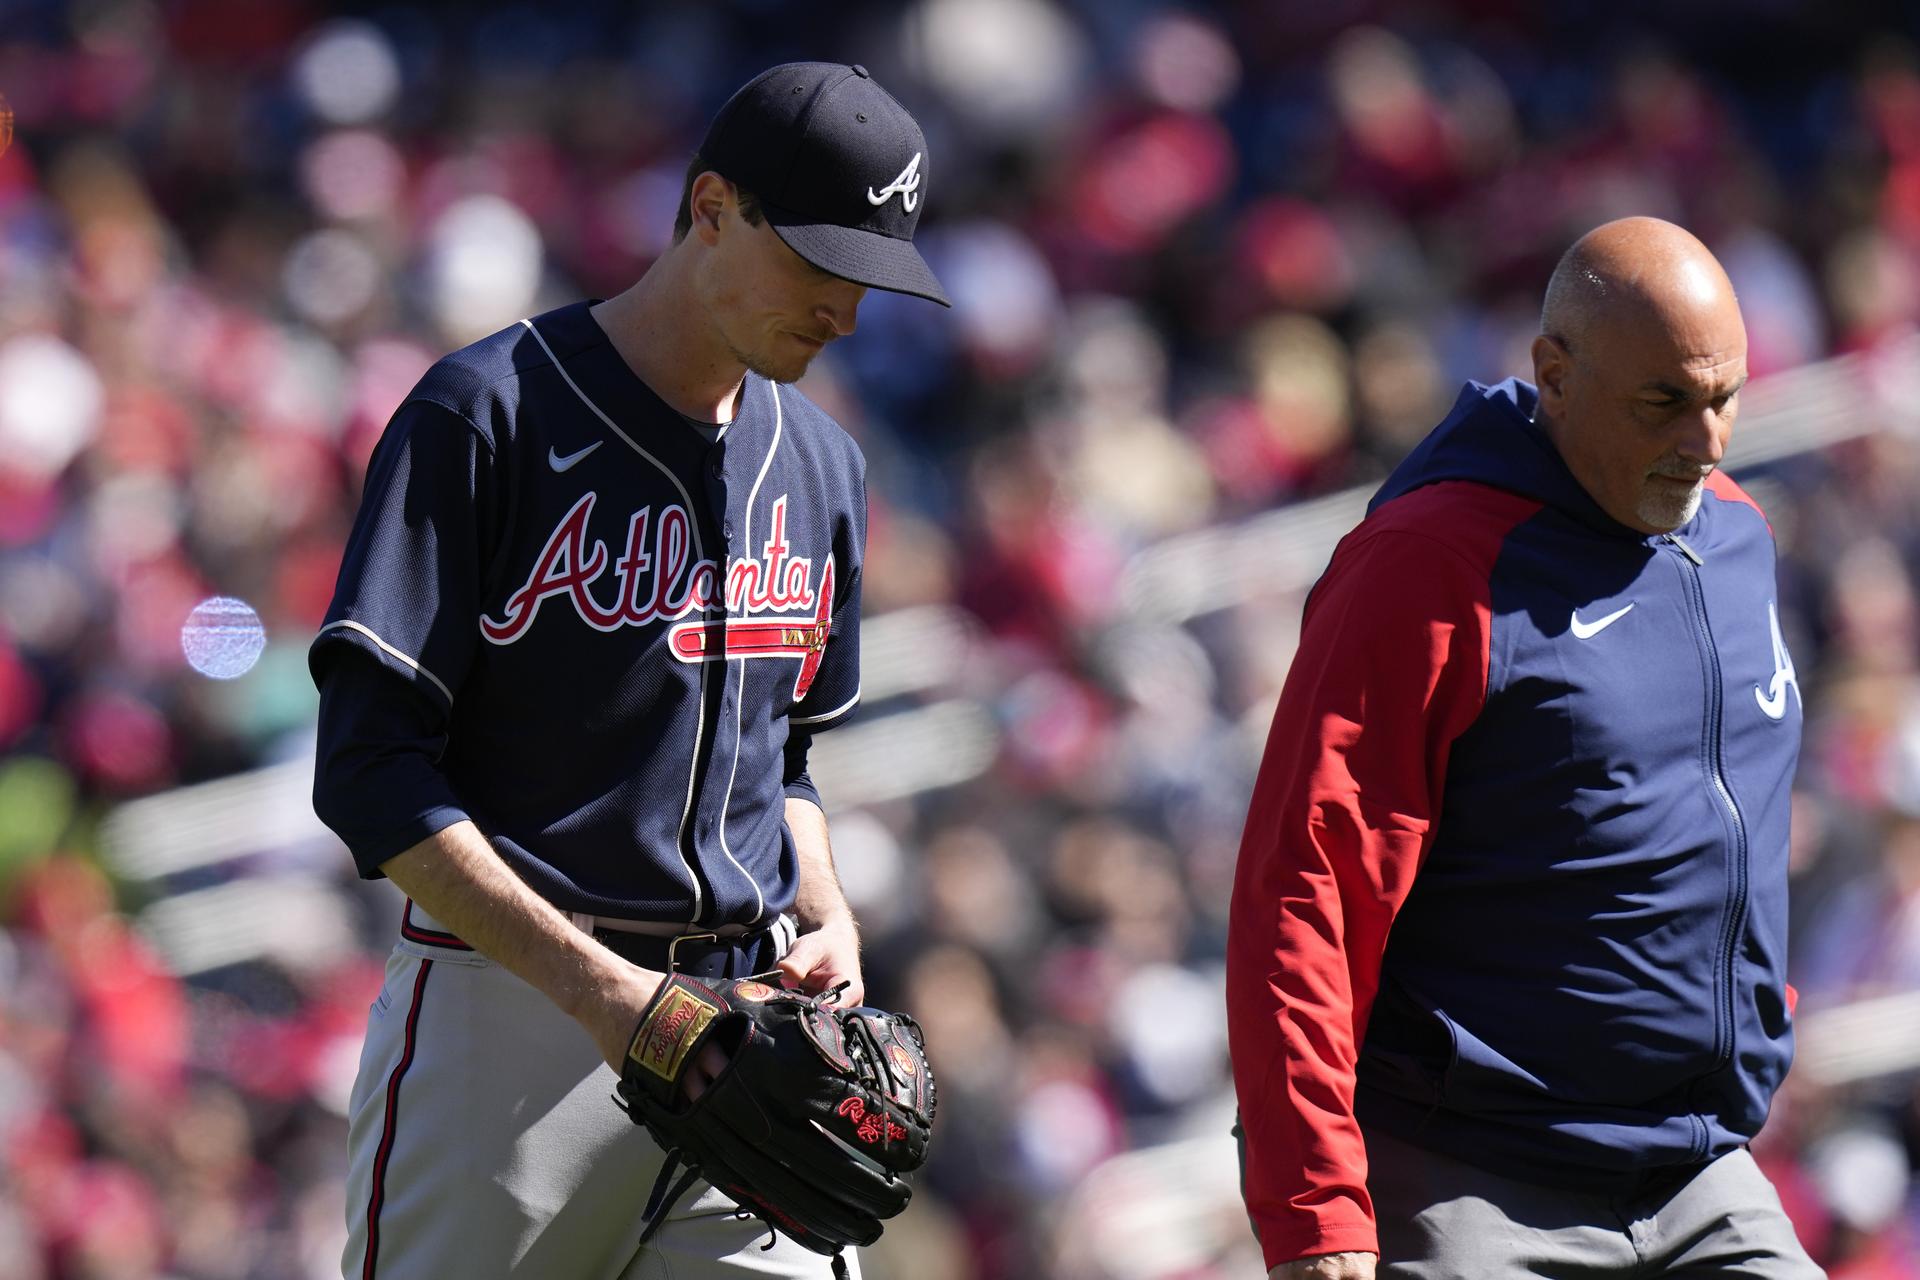 Max Fried exits with a trainer